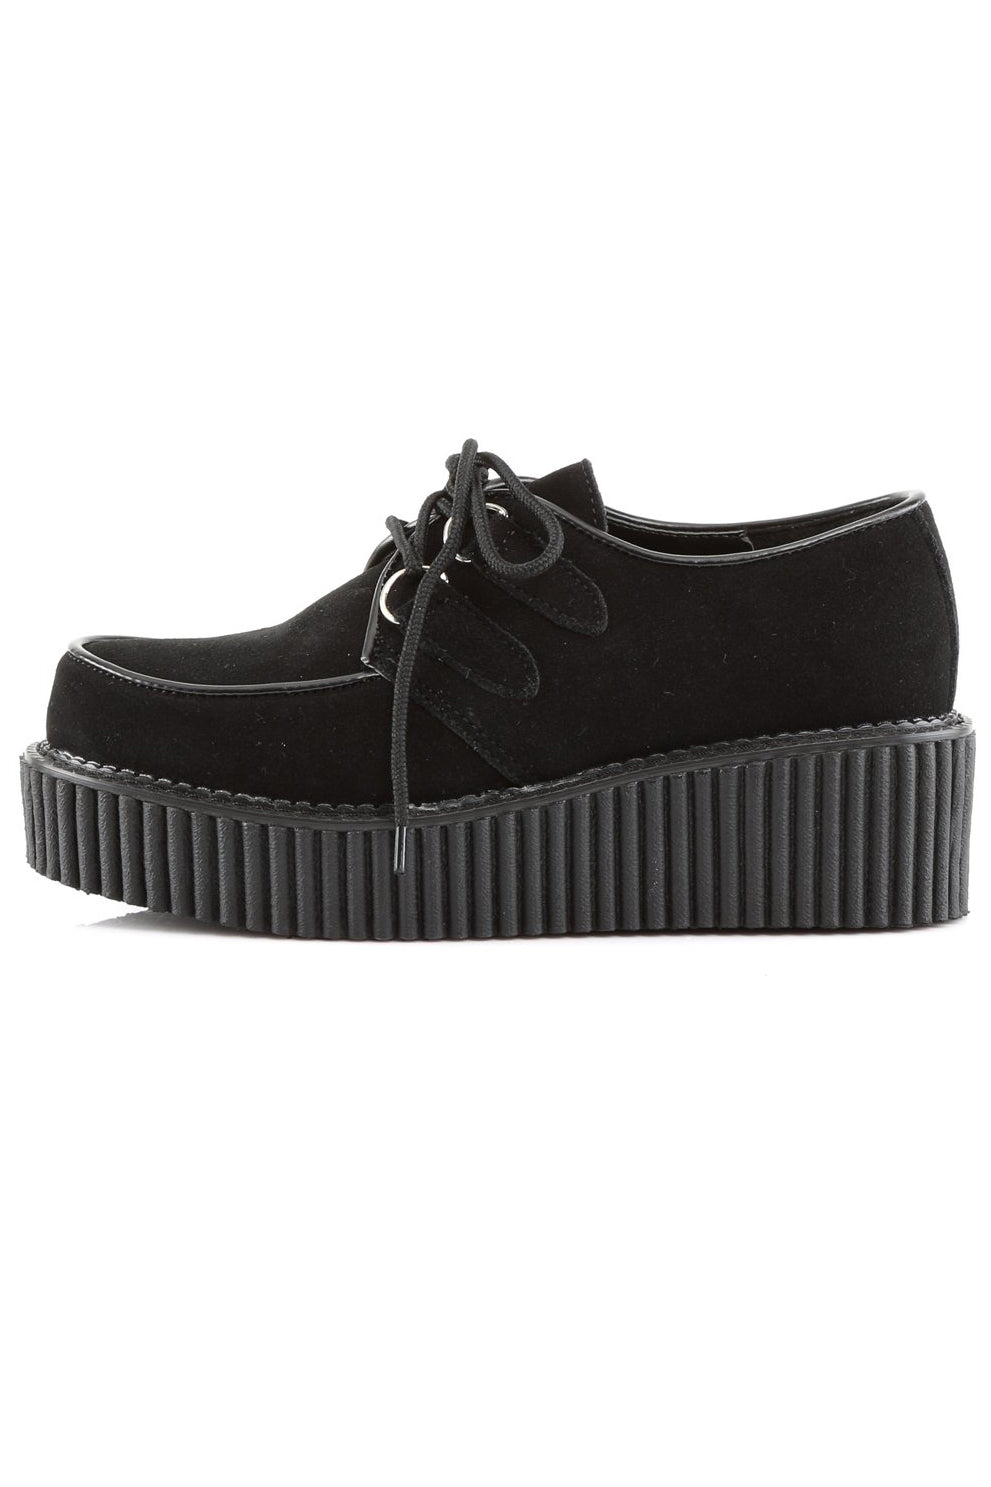 Haunt the Night CREEPER-101 Shoes [Black Suede]